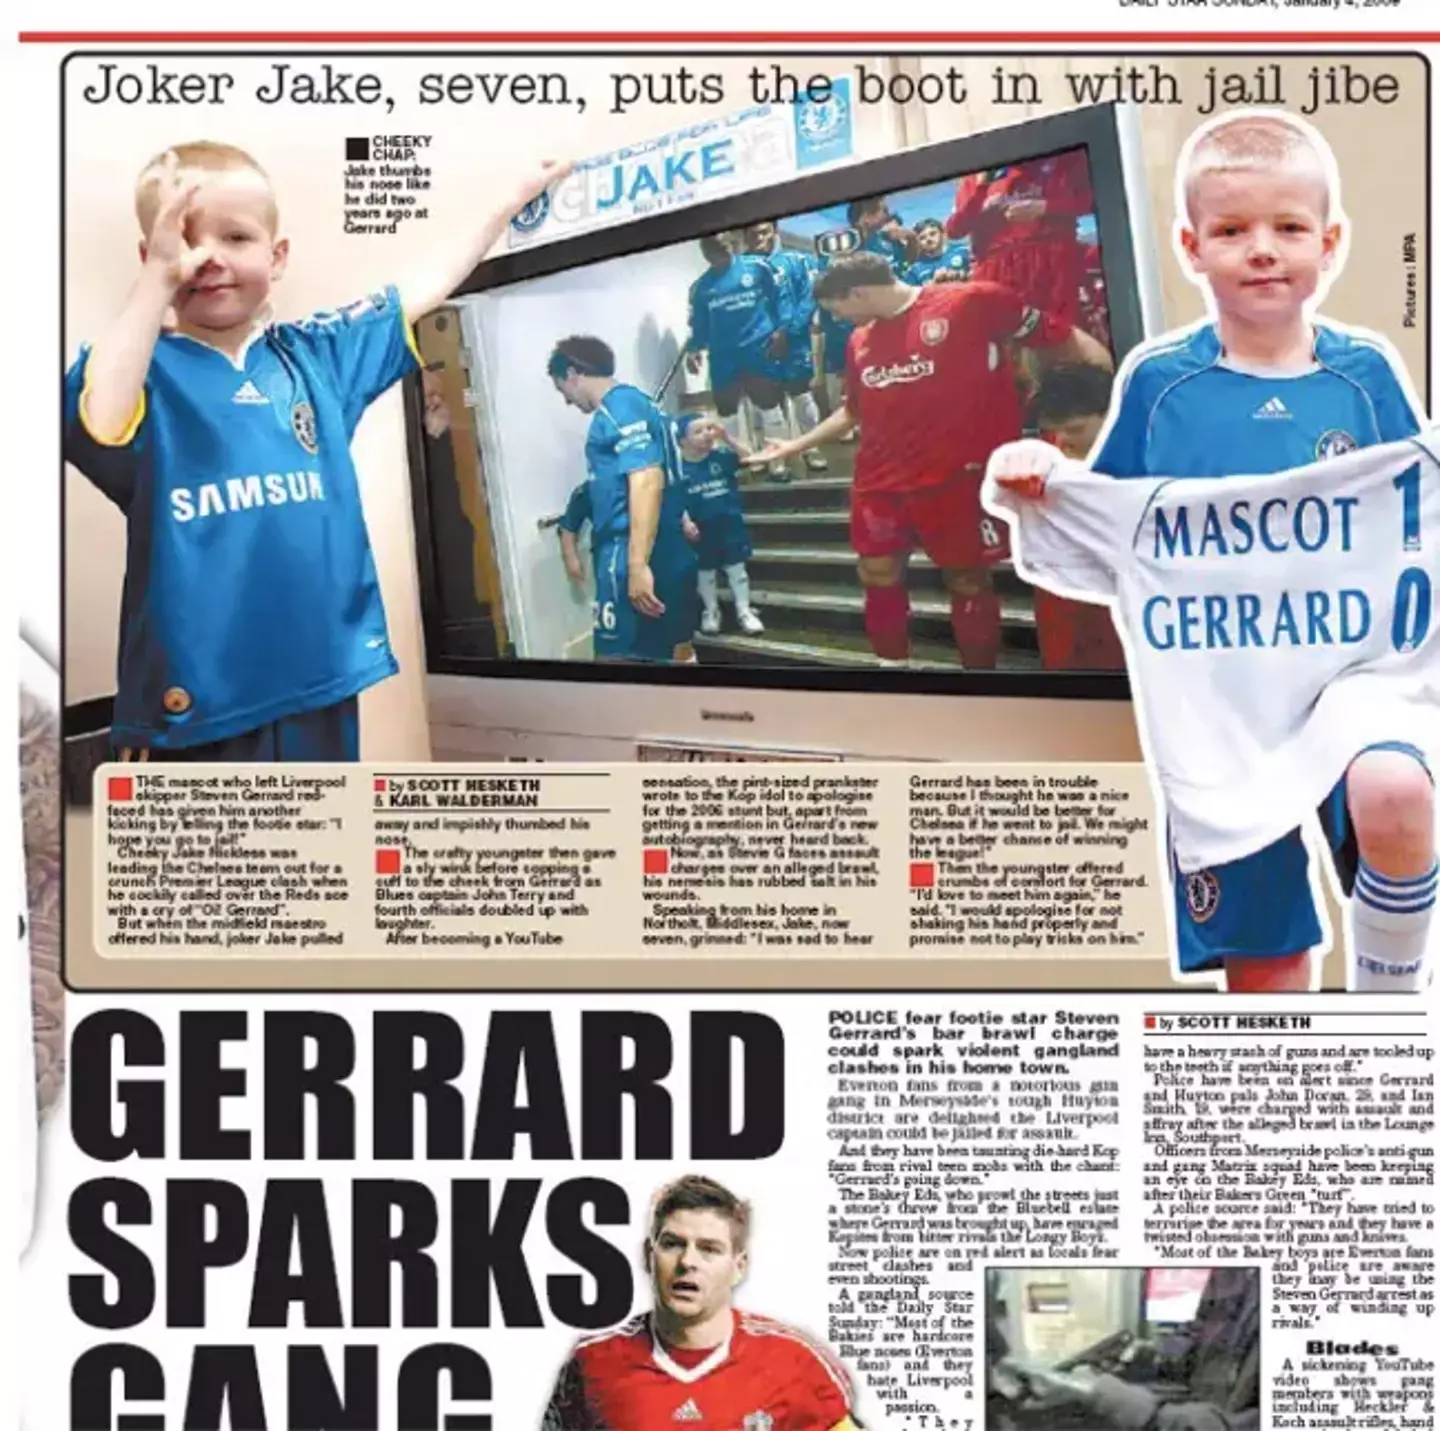 The young mascot made back page news. Image: Daily Star